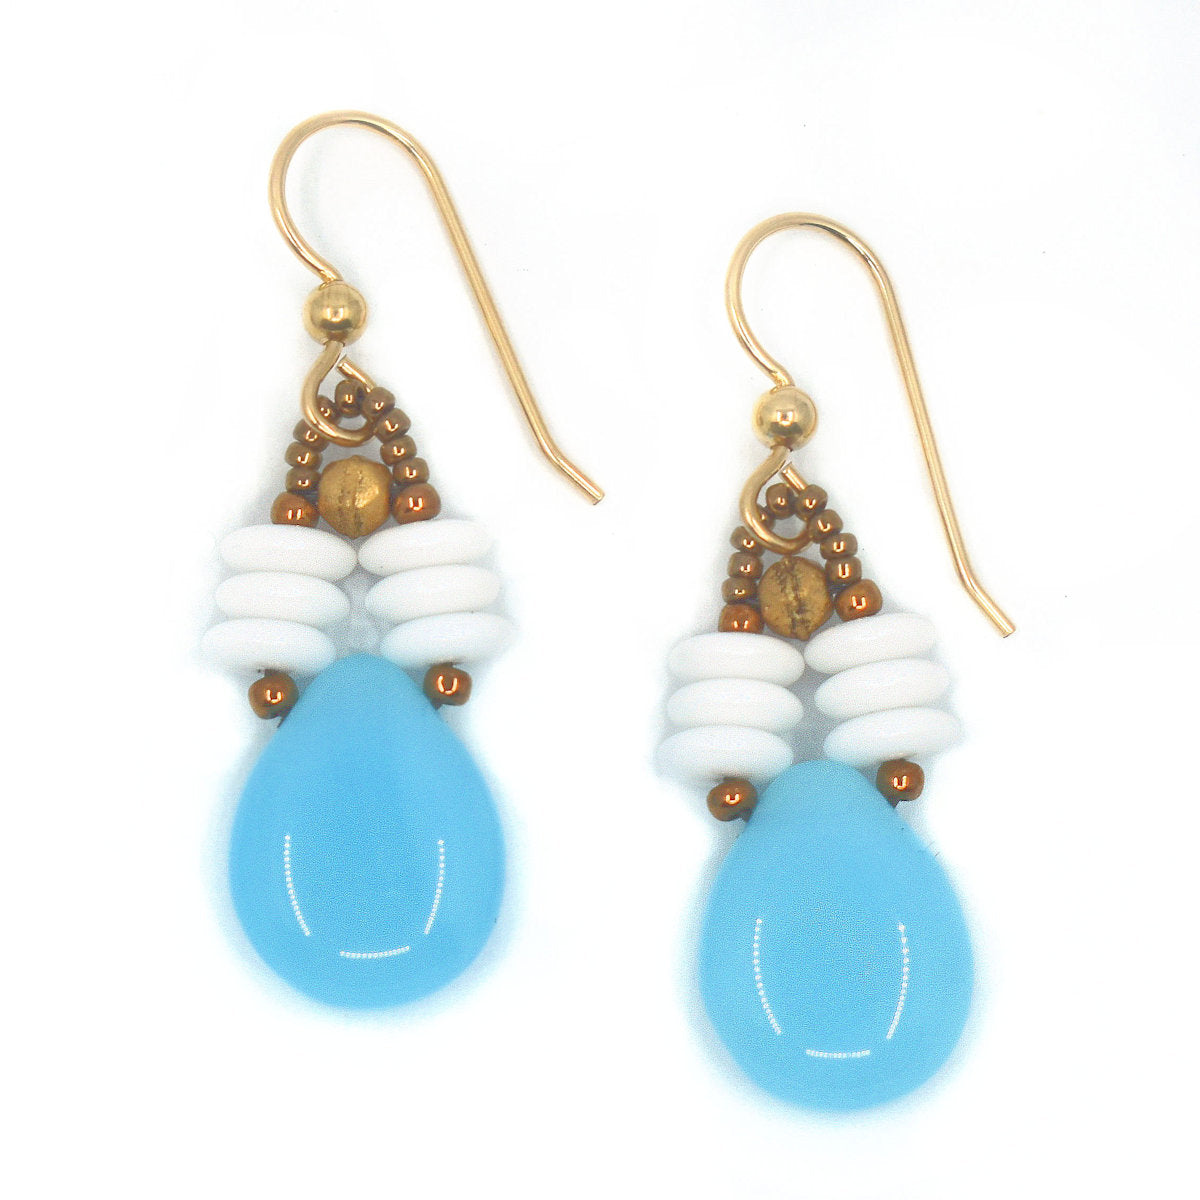 A pair of blue and white earrings laying on a white background. The earrings have a big pale blue teardrop suspended from two parallel stacks of white discs.